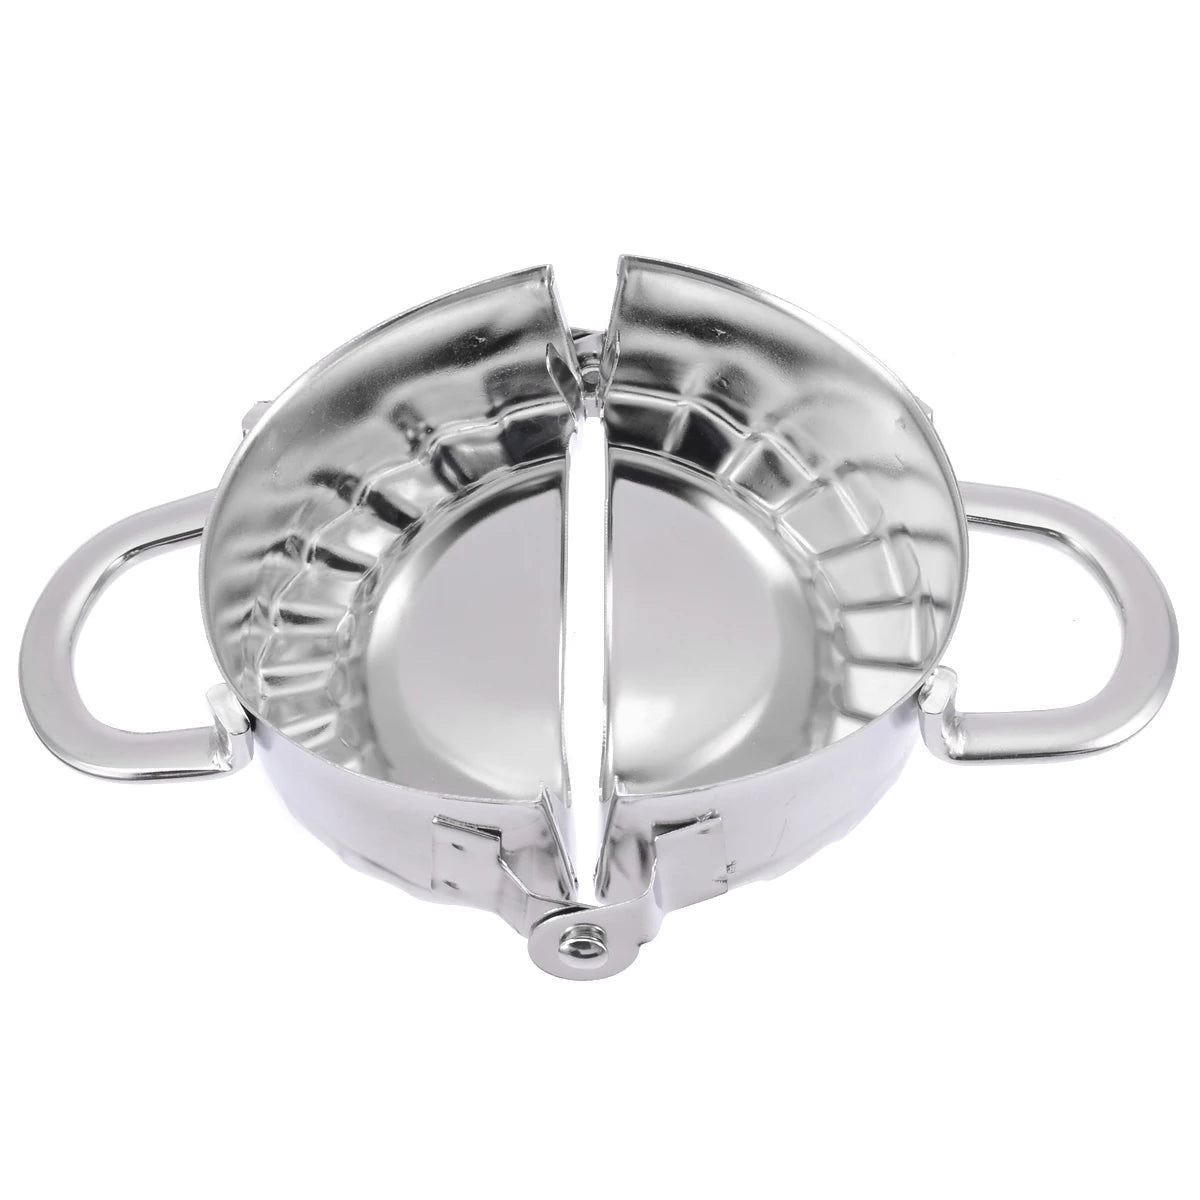 Stainless Steel Dumpling / Pastry Mould